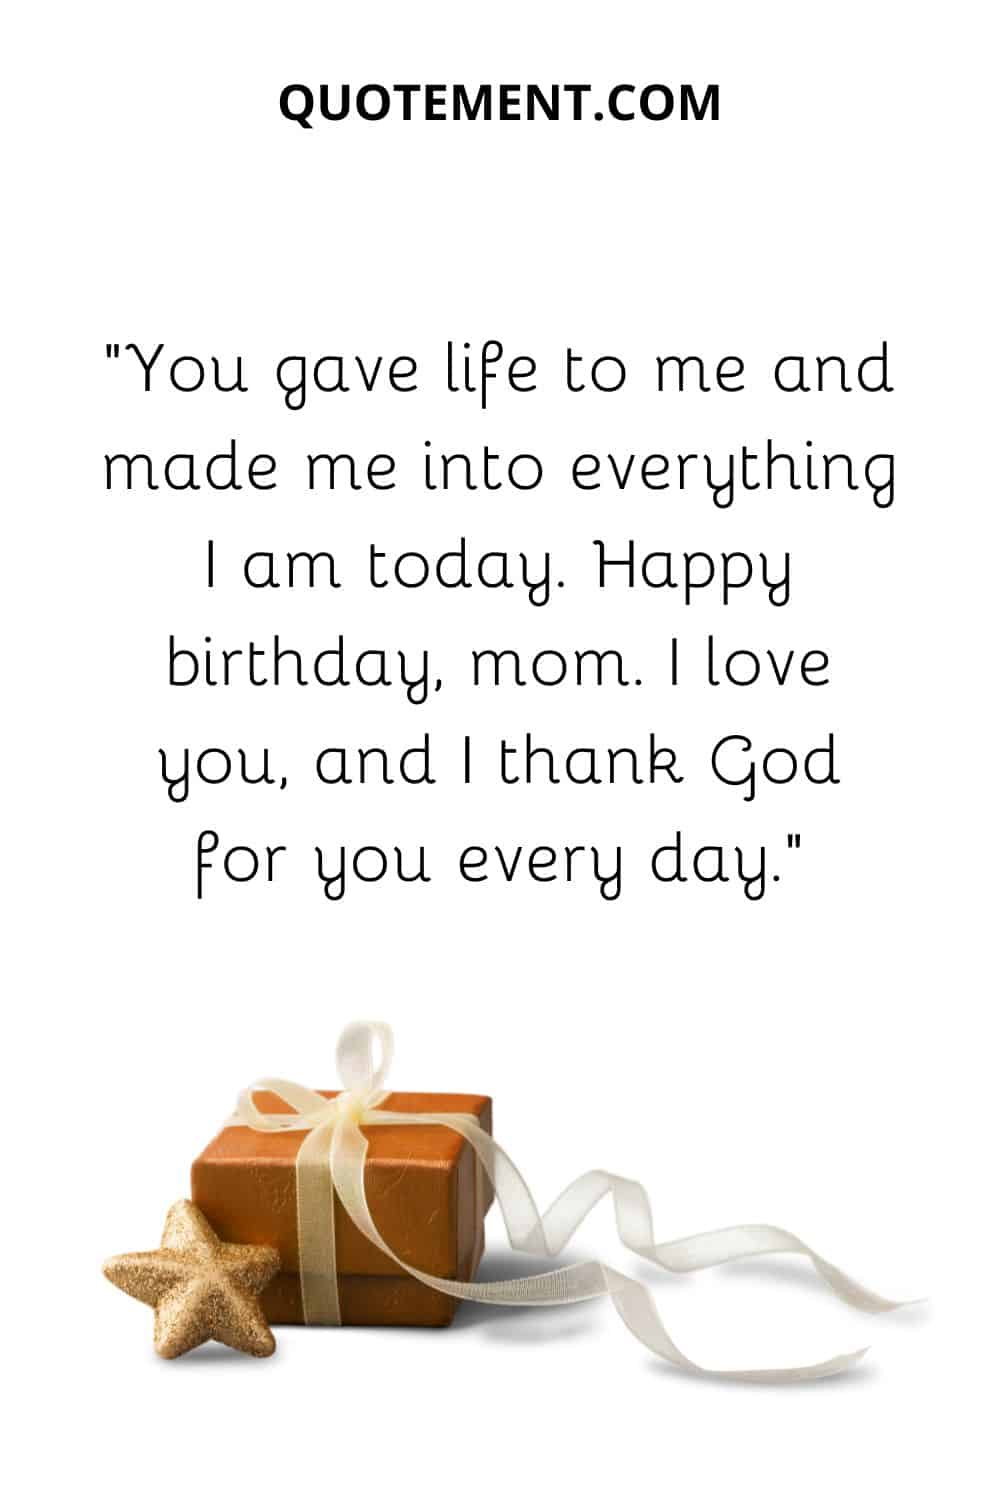 You gave life to me and made me into everything I am today